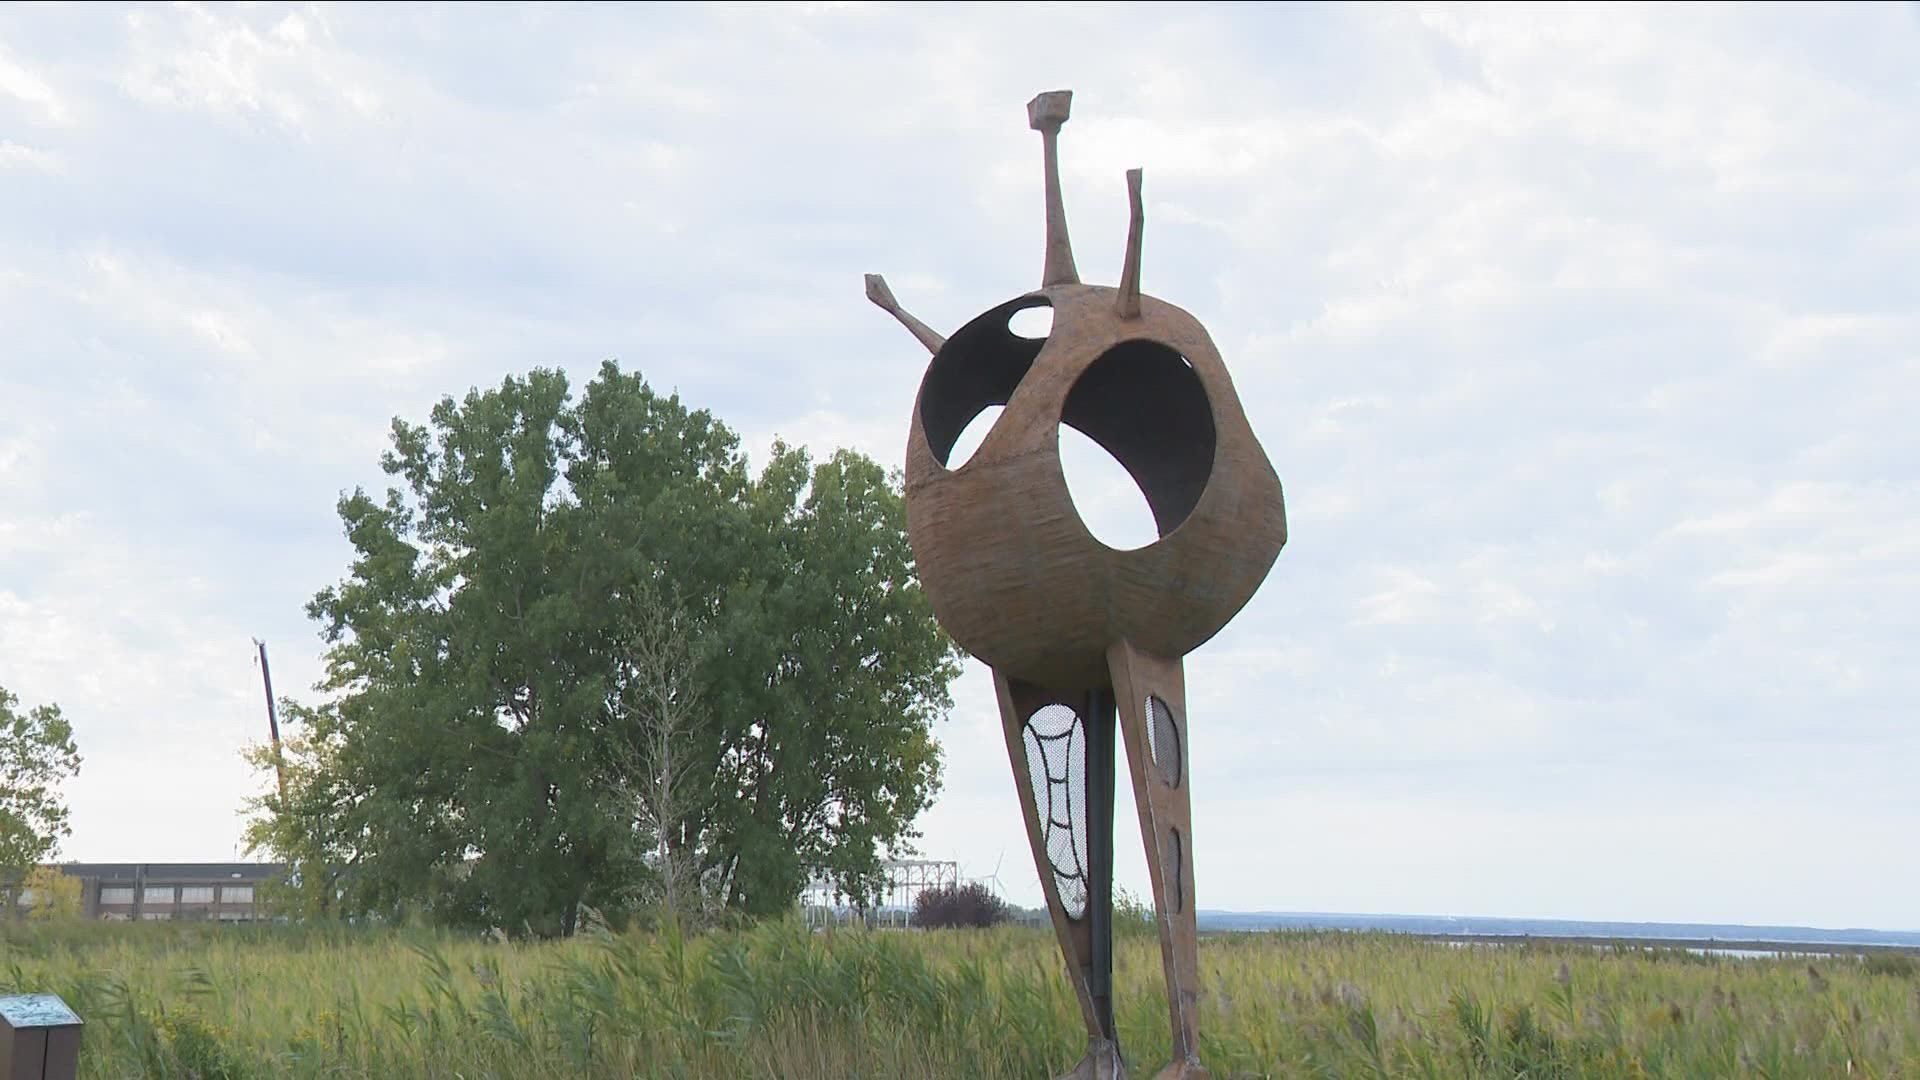 Round Man sculpture installed at Outer Harbor